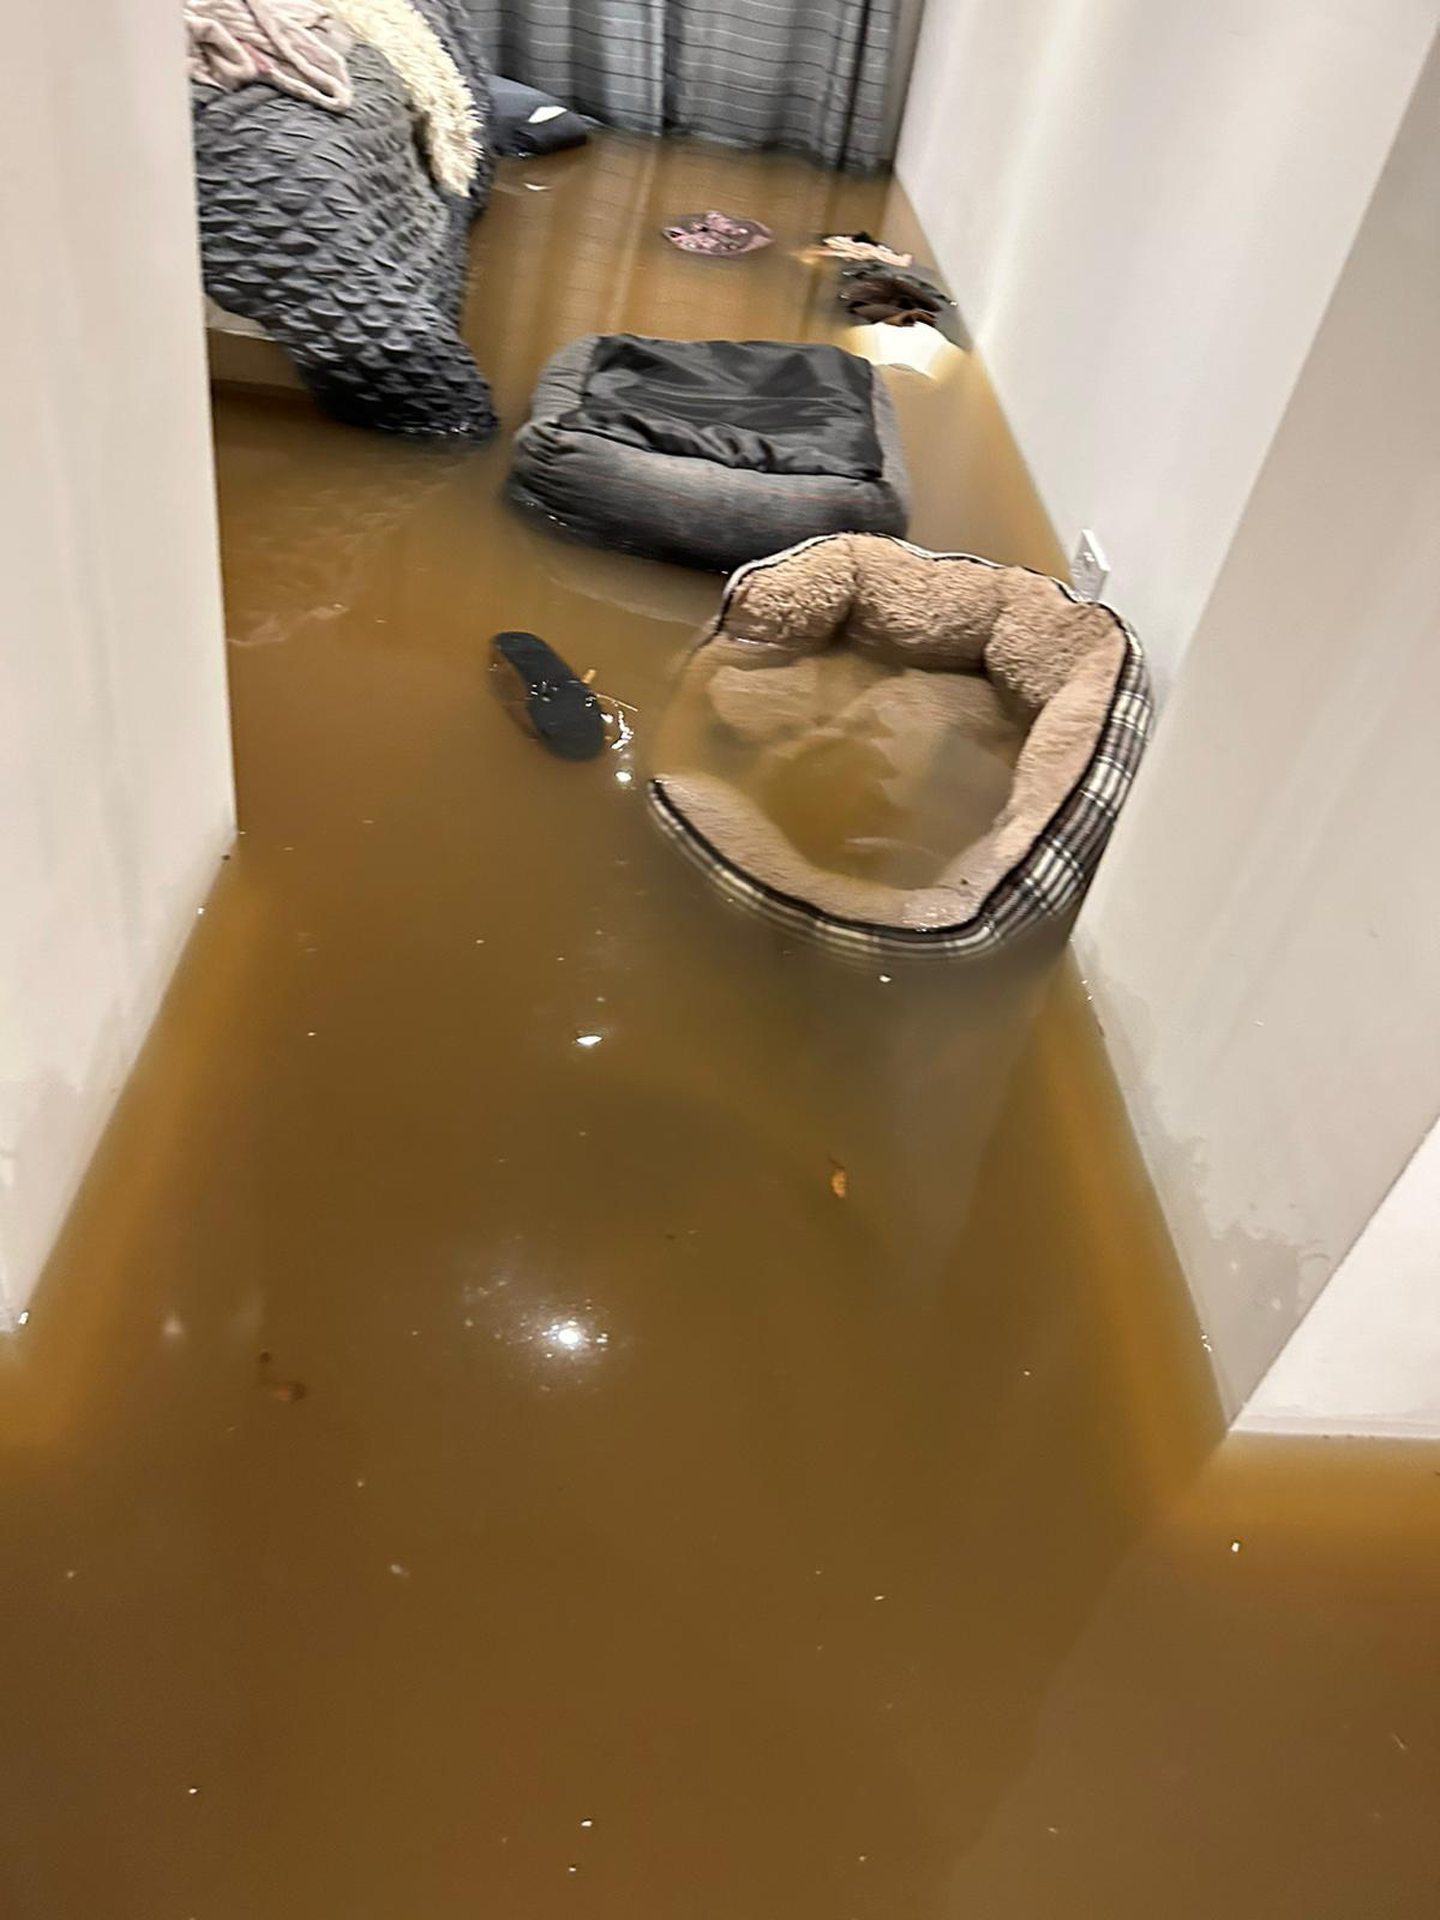 The flooded Airbnb in Perth 